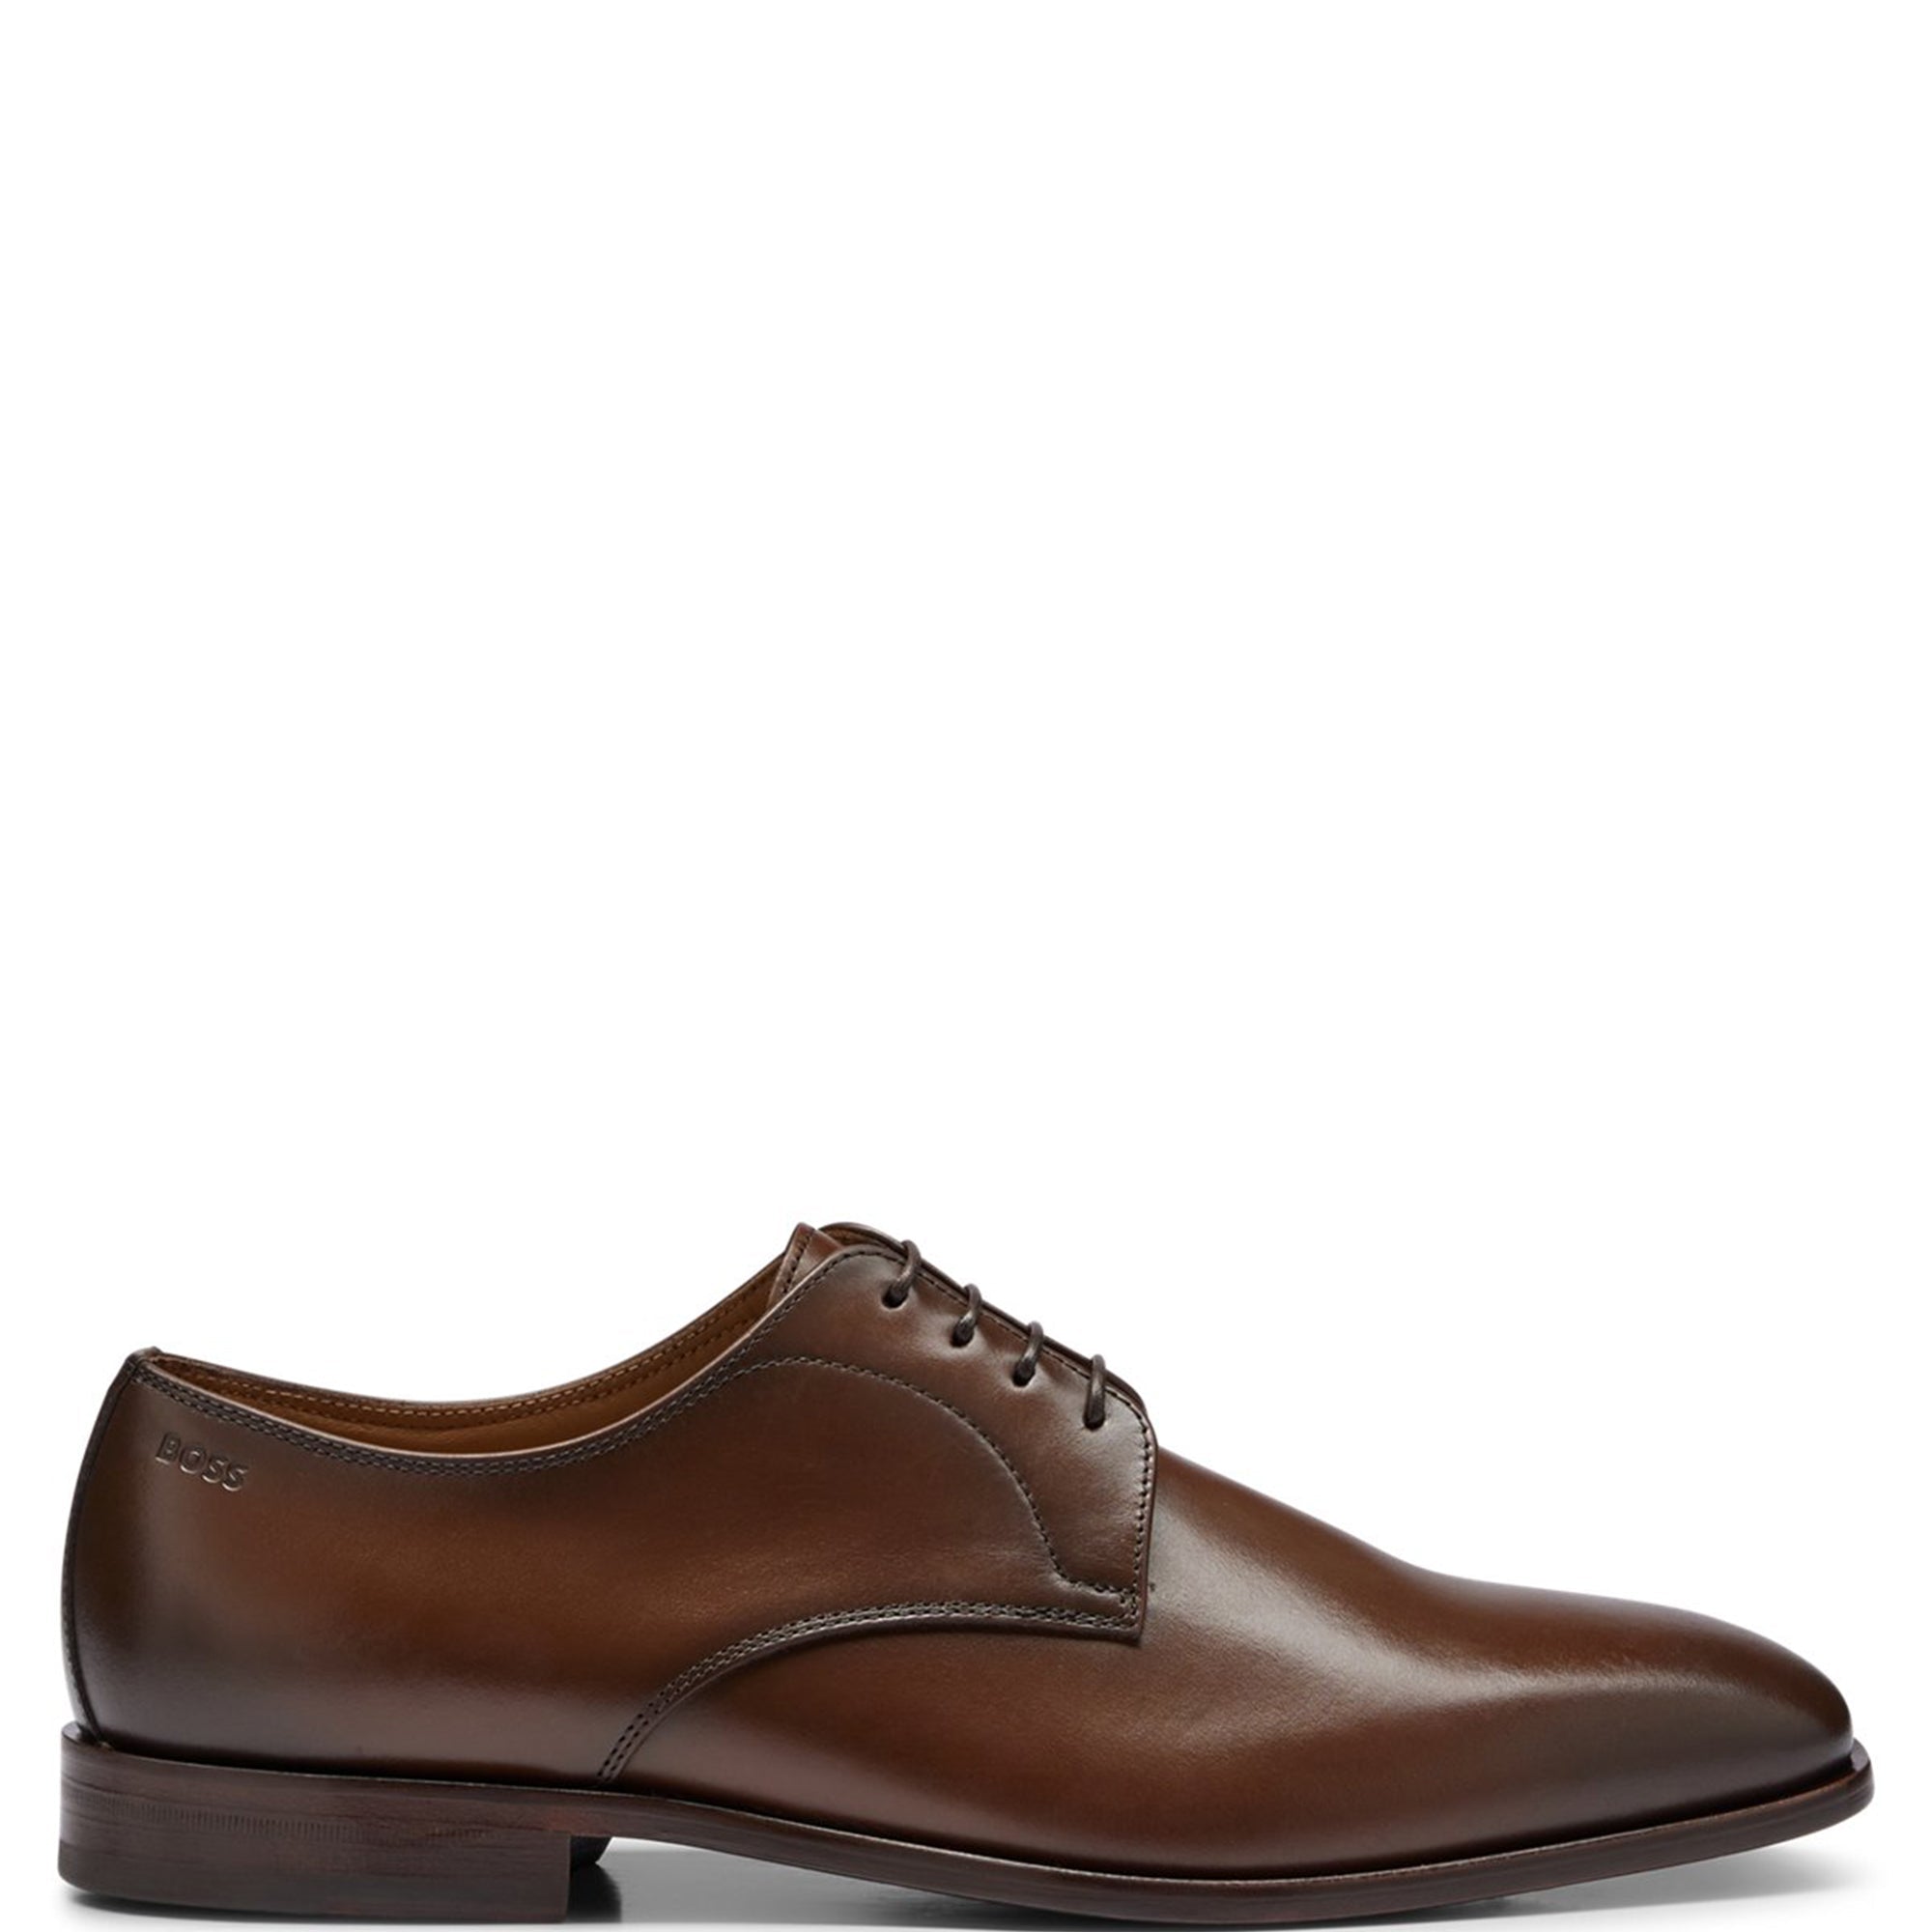 Boss Colby Derby Shoes Brown UK 10